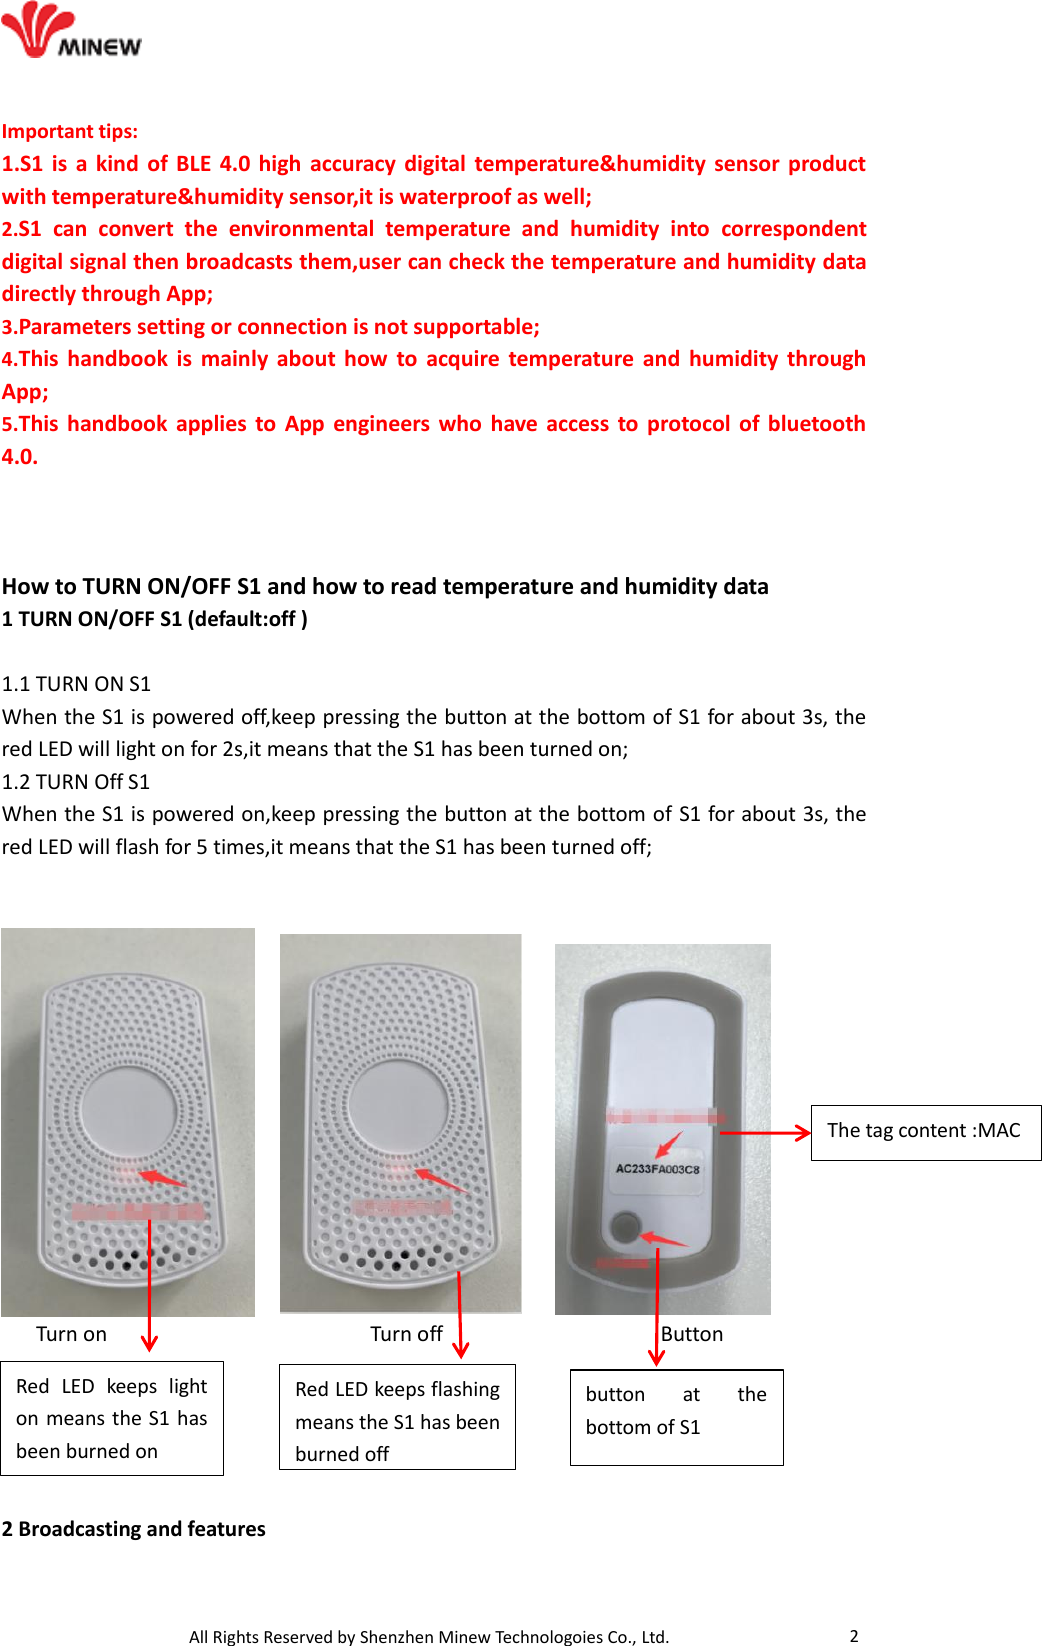                                   All Rights Reserved by Shenzhen Minew Technologoies Co., Ltd. 2 Important tips: 1.S1 is a kind  of  BLE  4.0  high  accuracy digital temperature&amp;humidity sensor  product with temperature&amp;humidity sensor,it is waterproof as well; 2.S1  can  convert  the  environmental  temperature  and  humidity  into  correspondent digital signal then broadcasts them,user can check the temperature and humidity data directly through App; 3.Parameters setting or connection is not supportable; 4.This handbook is  mainly about  how  to  acquire temperature  and  humidity  through App; 5.This handbook applies to App engineers  who  have access to protocol of bluetooth 4.0.      How to TURN ON/OFF S1 and how to read temperature and humidity data 1 TURN ON/OFF S1 (default:off )  1.1 TURN ON S1 When the S1 is powered off,keep pressing the button at the bottom of S1 for about 3s, the red LED will light on for 2s,it means that the S1 has been turned on; 1.2 TURN Off S1 When the S1 is powered on,keep pressing the button at the bottom of S1 for about 3s, the red LED will flash for 5 times,it means that the S1 has been turned off;              Turn on                       Turn off                   Button       2 Broadcasting and features Red  LED  keeps  light on means the S1 has been burned on Red LED keeps flashing means the S1 has been burned off button  at  the bottom of S1 The tag content :MAC 